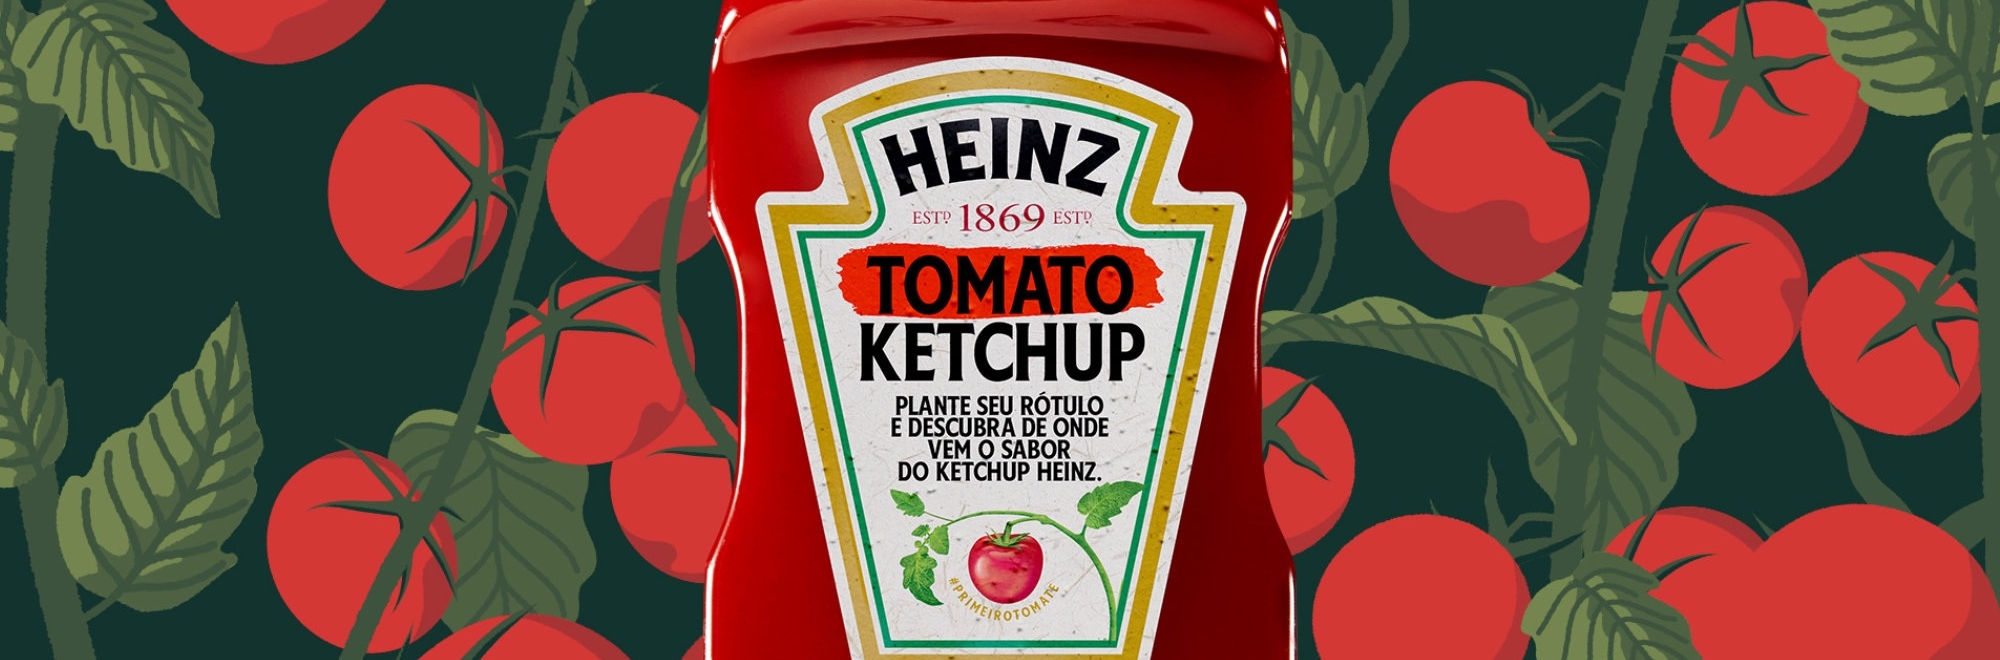 Heinz invites consumers to plant the label of tomato seeds that gives ketchup its unique flavour